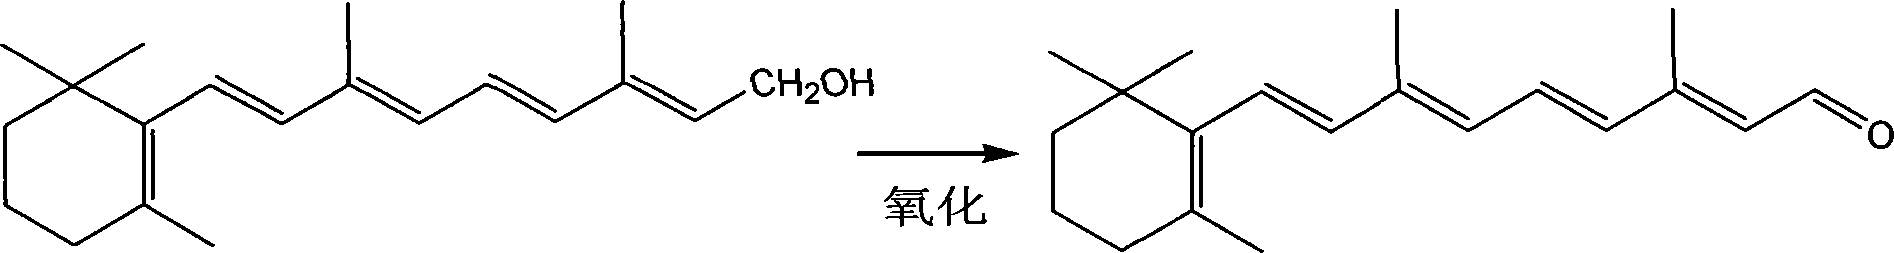 Technique for synthesizing vitamin A aldehyde